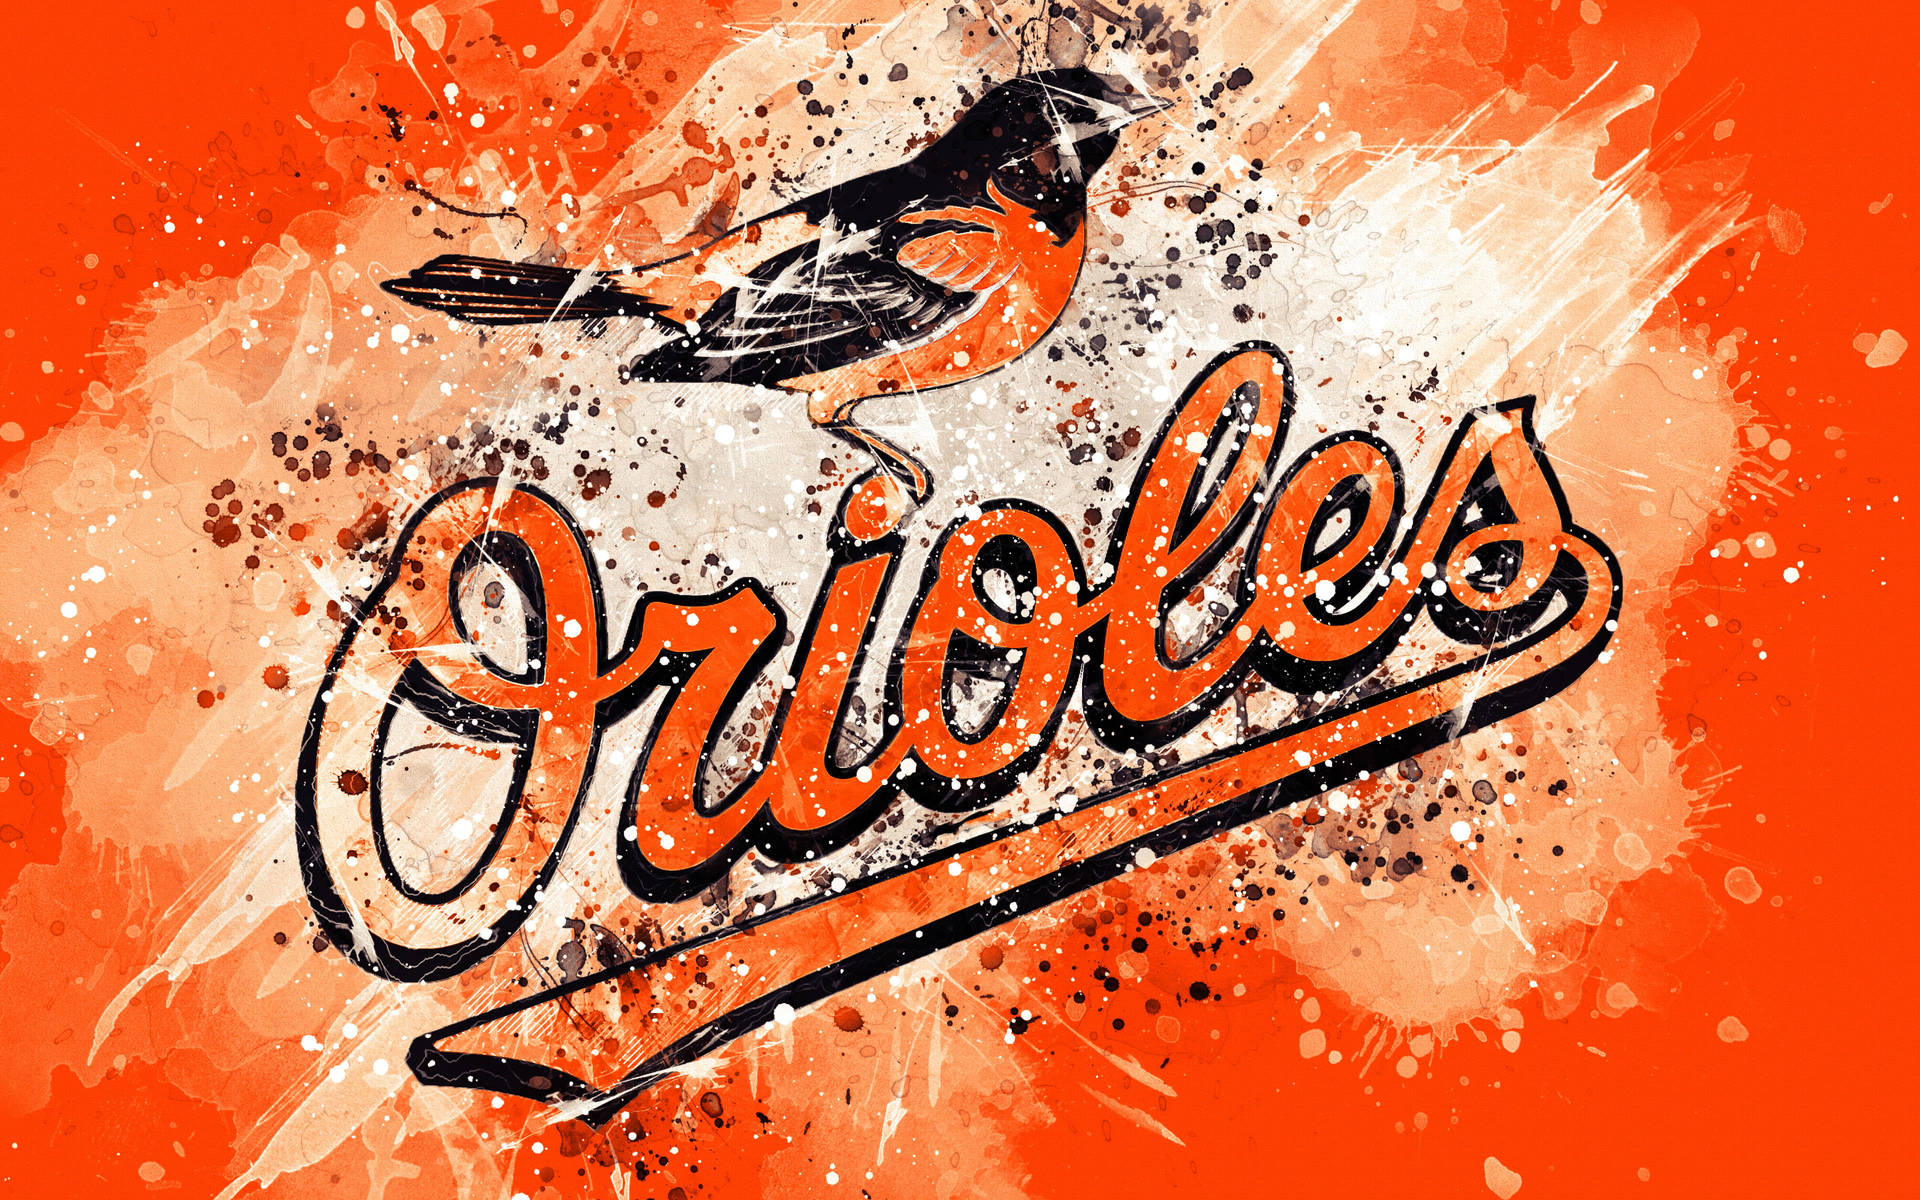 Download wallpapers Baltimore Orioles 4k scorched logo MLB orange  wooden background american baseball team grunge baseball Baltimore  Orioles logo fire texture USA for desktop with resolution 3840x2400 High  Quality HD pictures wallpapers